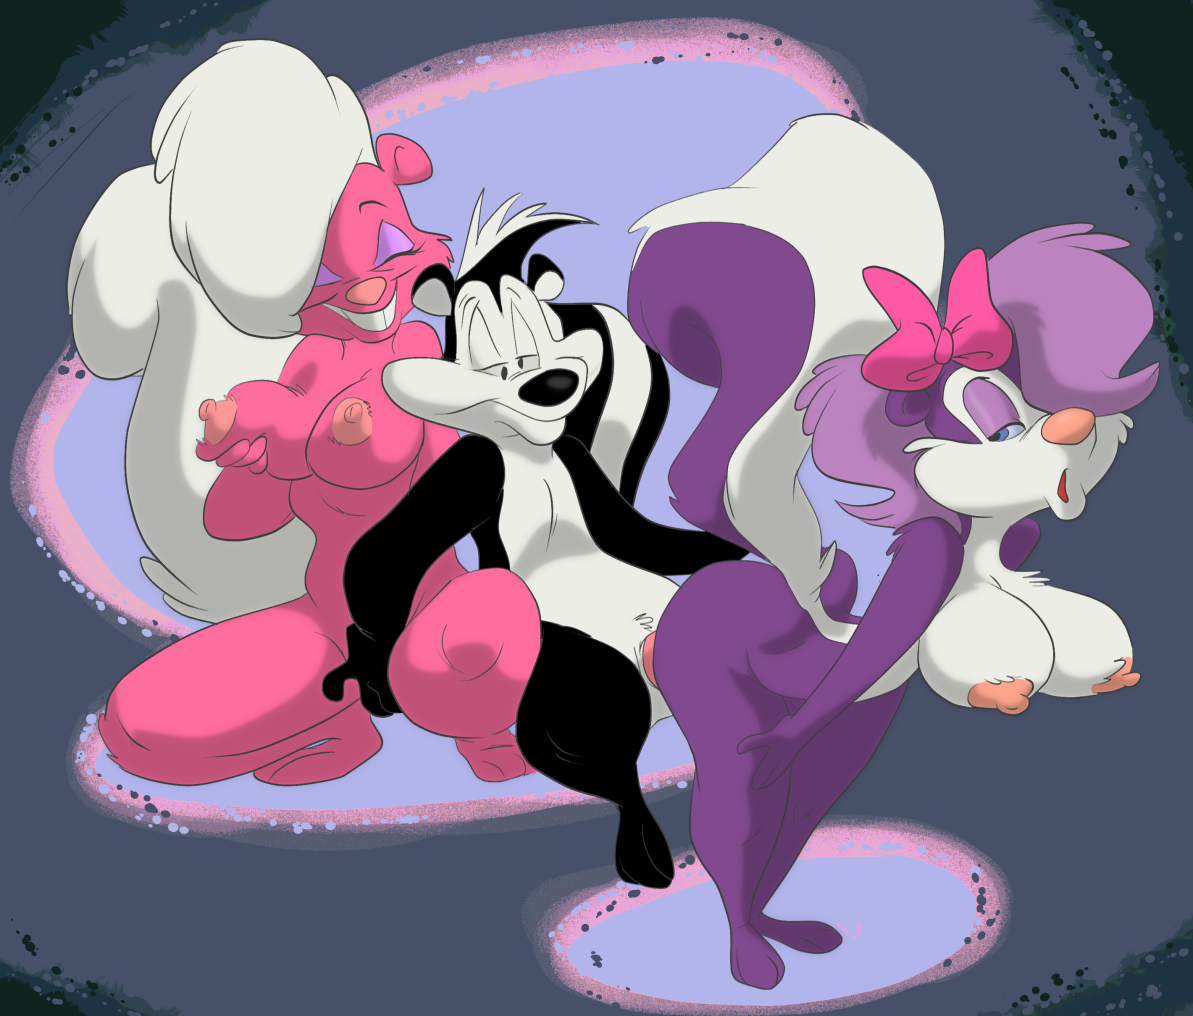 Pepe Le Pew Looney Tunes Porn - Showing Porn Images for Pepe le pew and cat porn | www ...